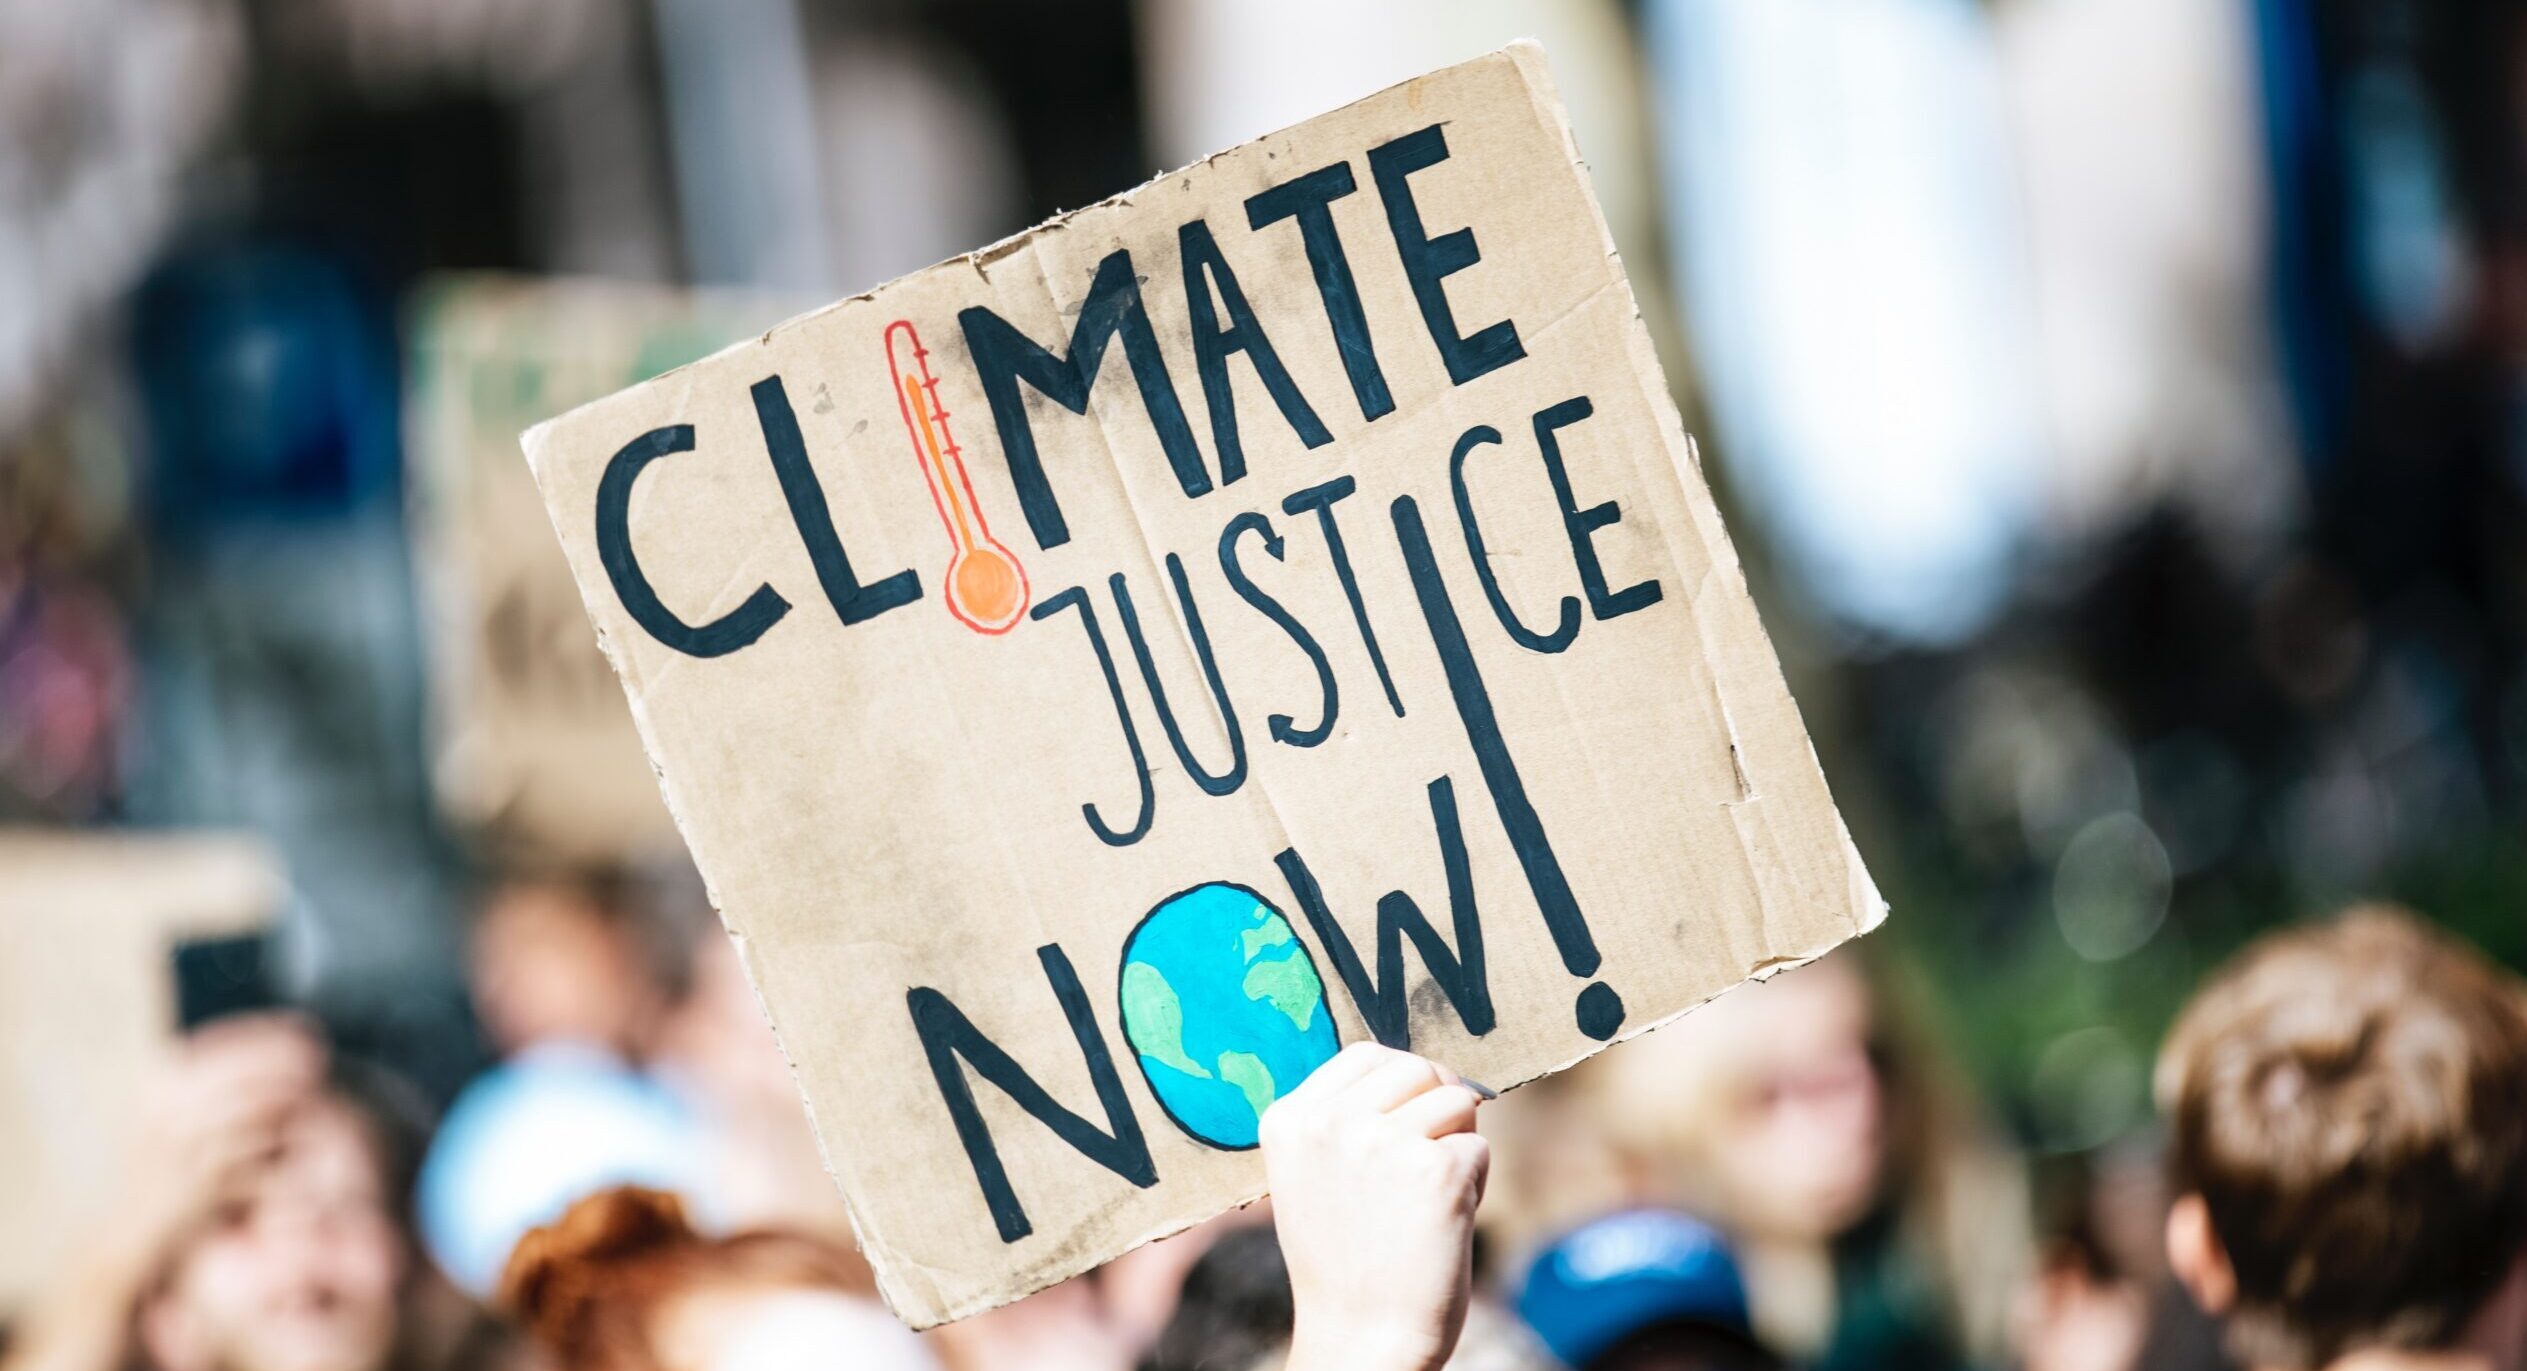 Exploring support for climate justice policies in the United States